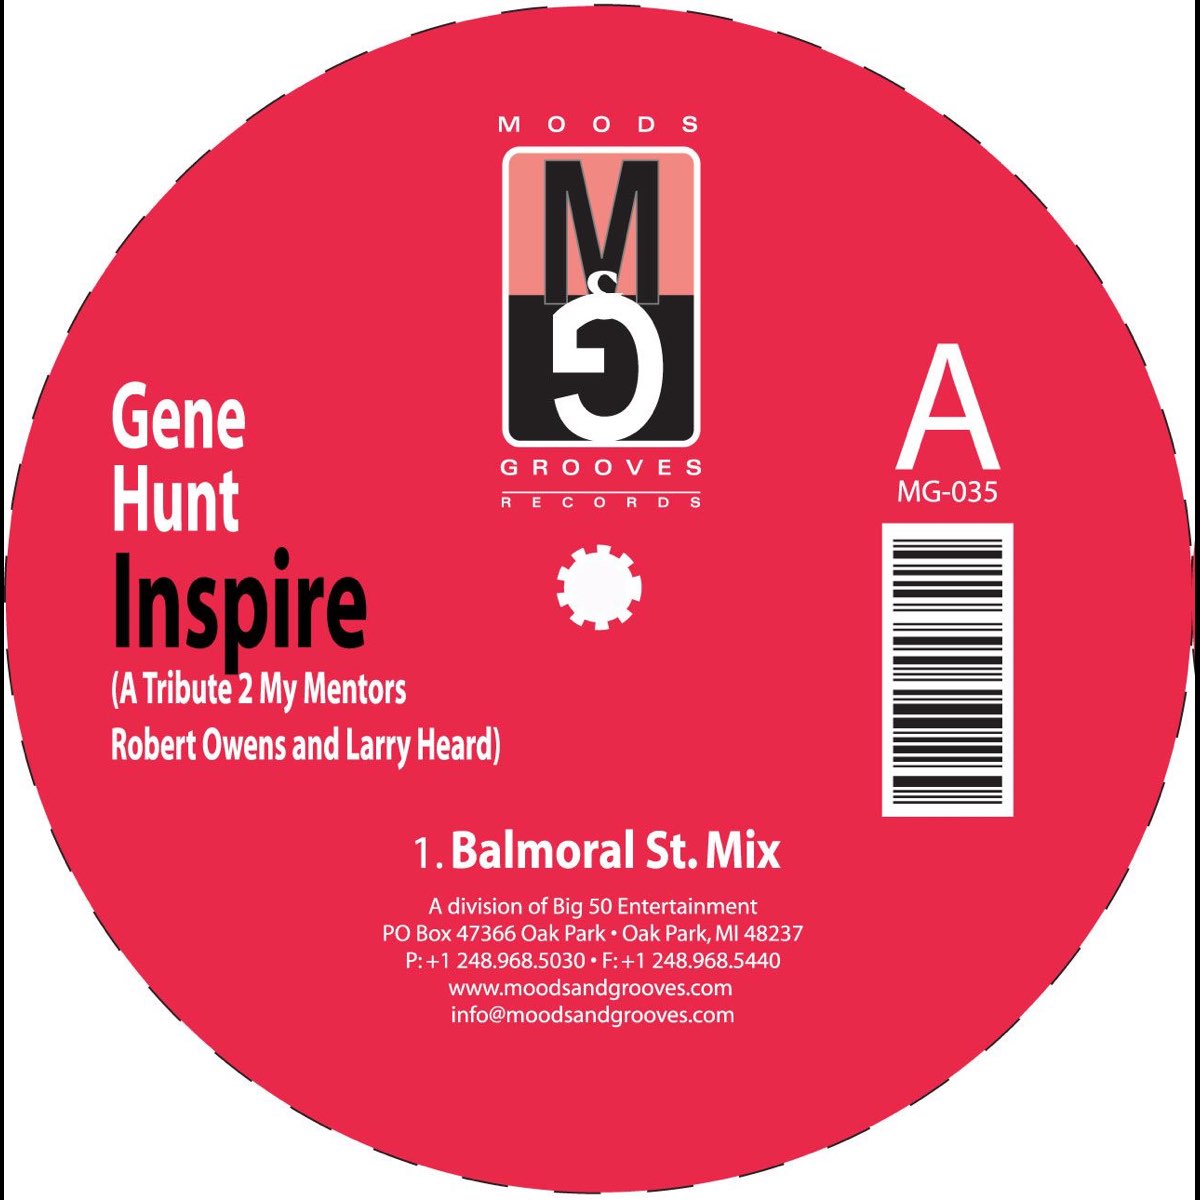 Inspire - A Tribute to my Mentors Robert Owens and Larry Heard - EP by Gene  Hunt on Apple Music